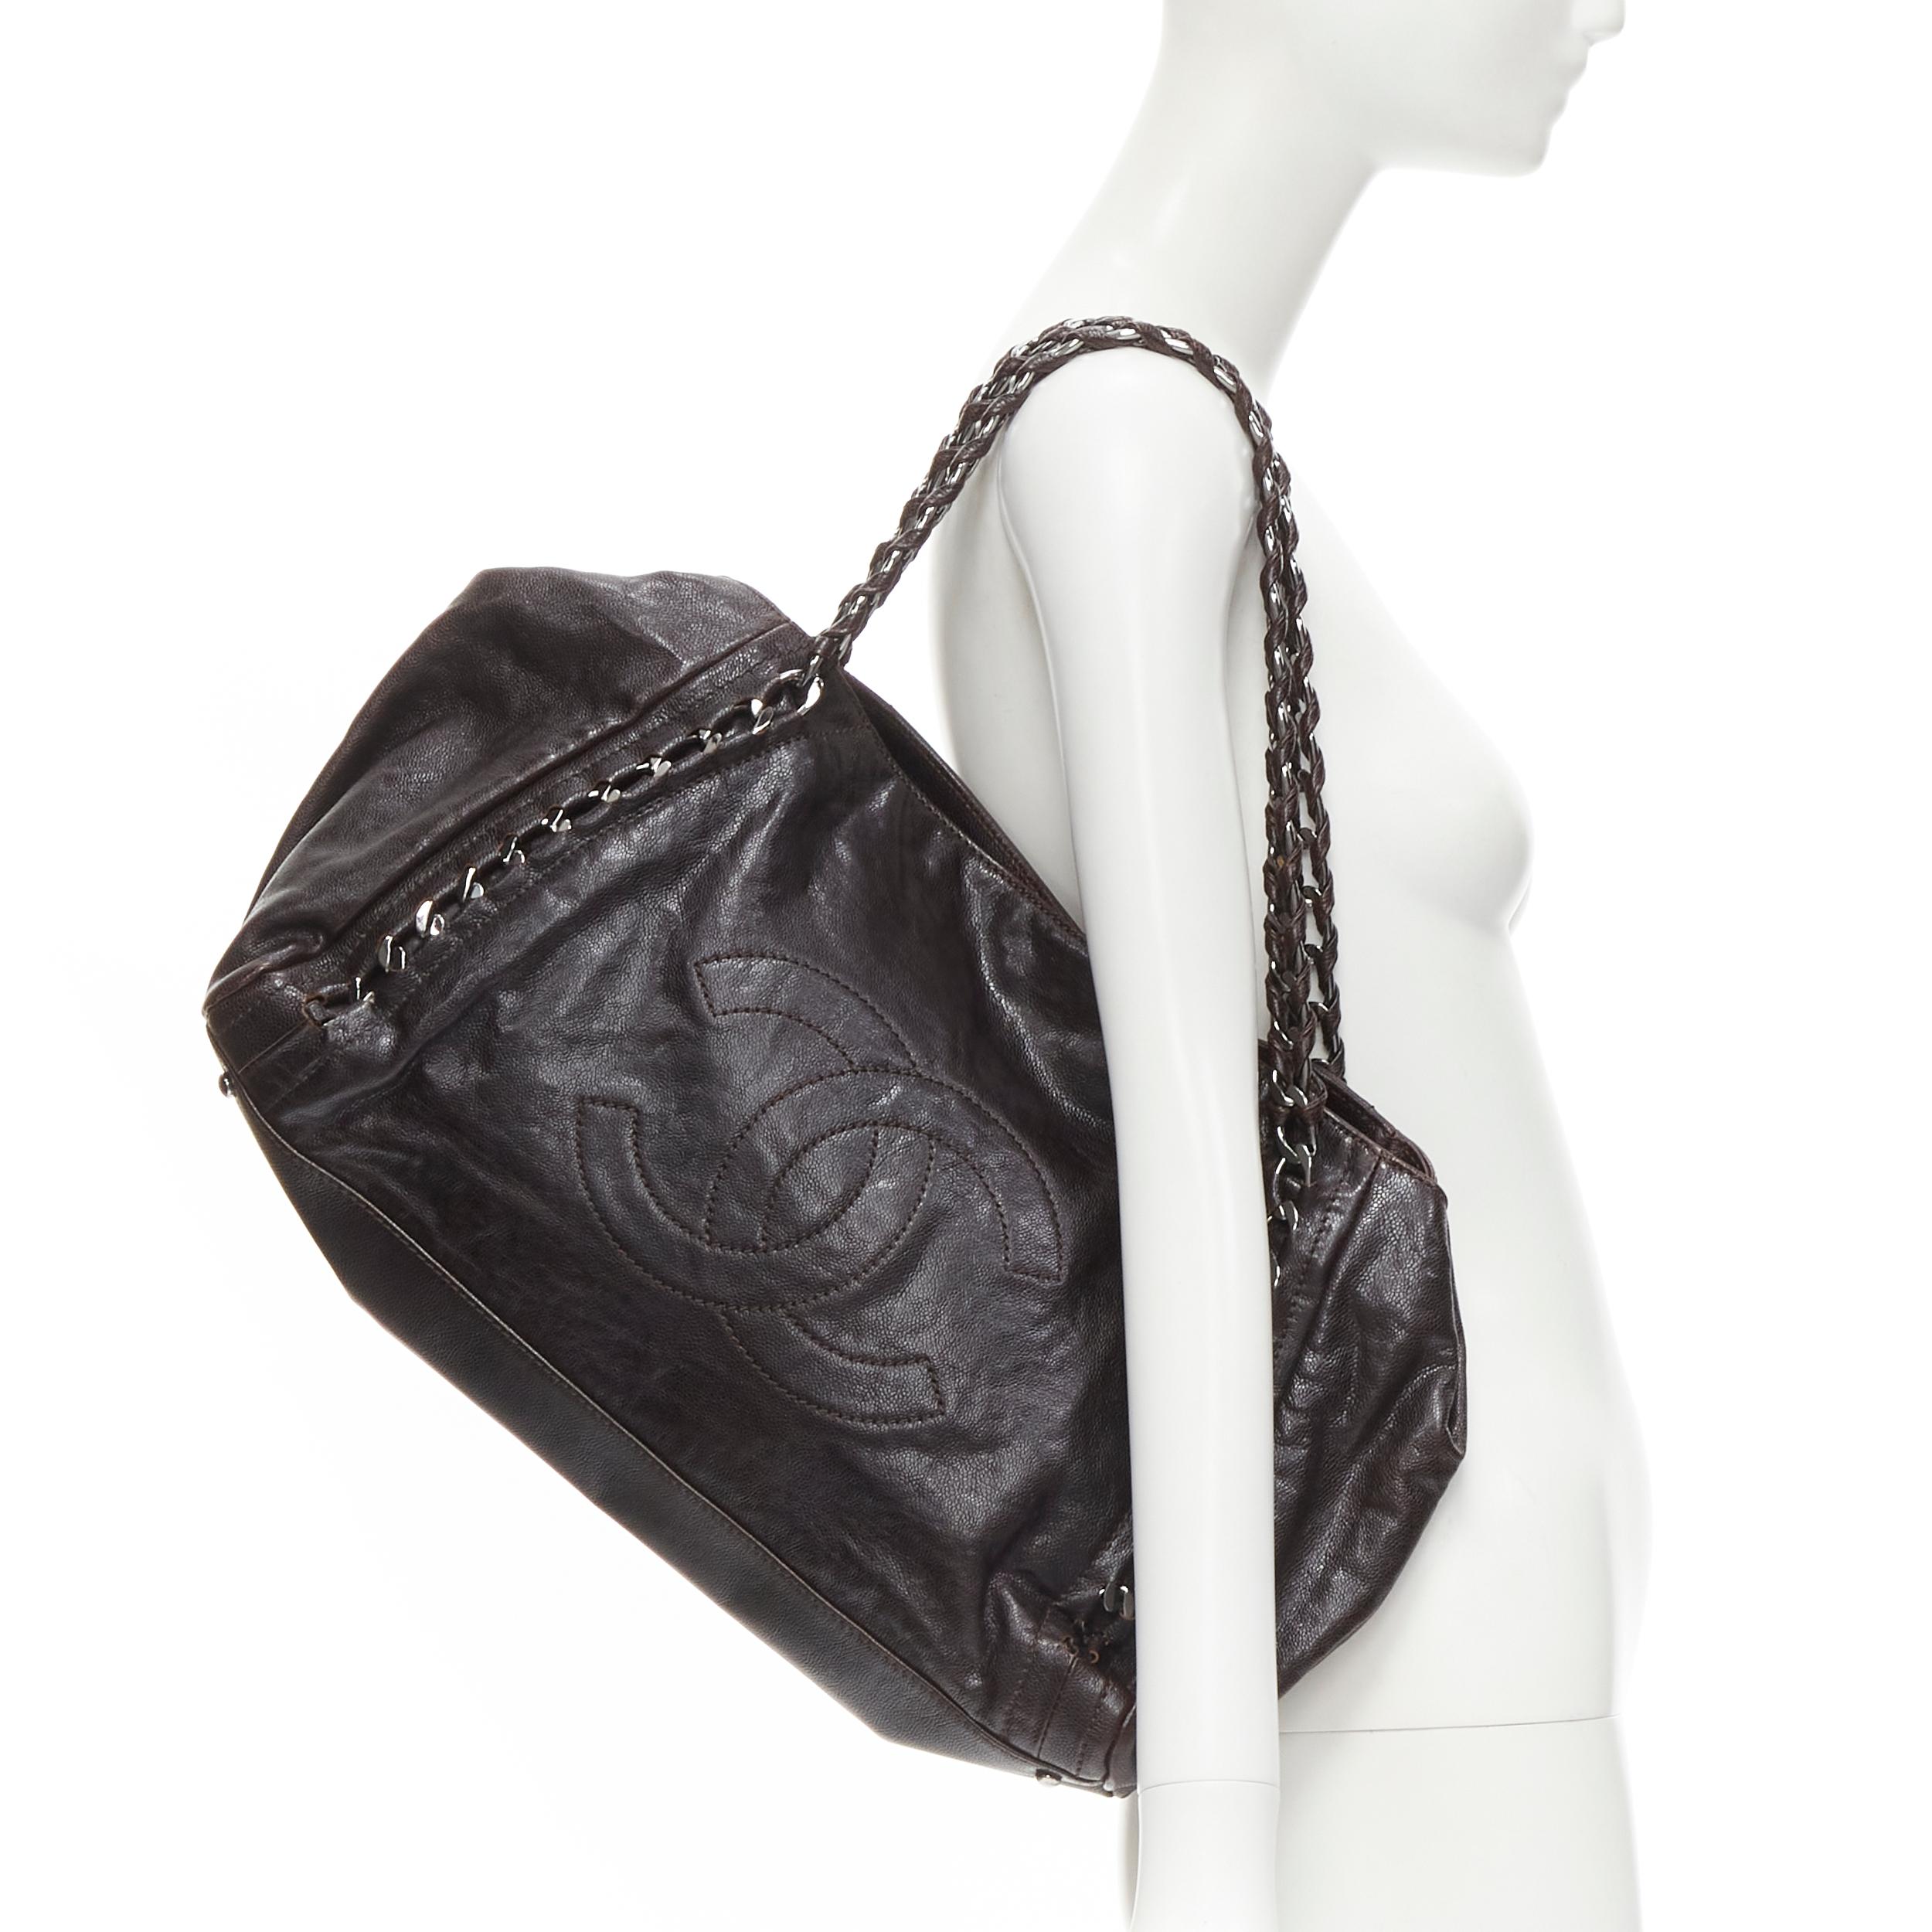 CHANEL East West dark brown grained leather CC logo chunky silver chain hobo bag 
Reference: GIYG/A00243 
Brand: Chanel 
Designer: Karl Lagerfeld 
Model: East West tote 
Material: Leather 
Color: Brown 
Pattern: Solid 
Closure: Magnetic 
Extra